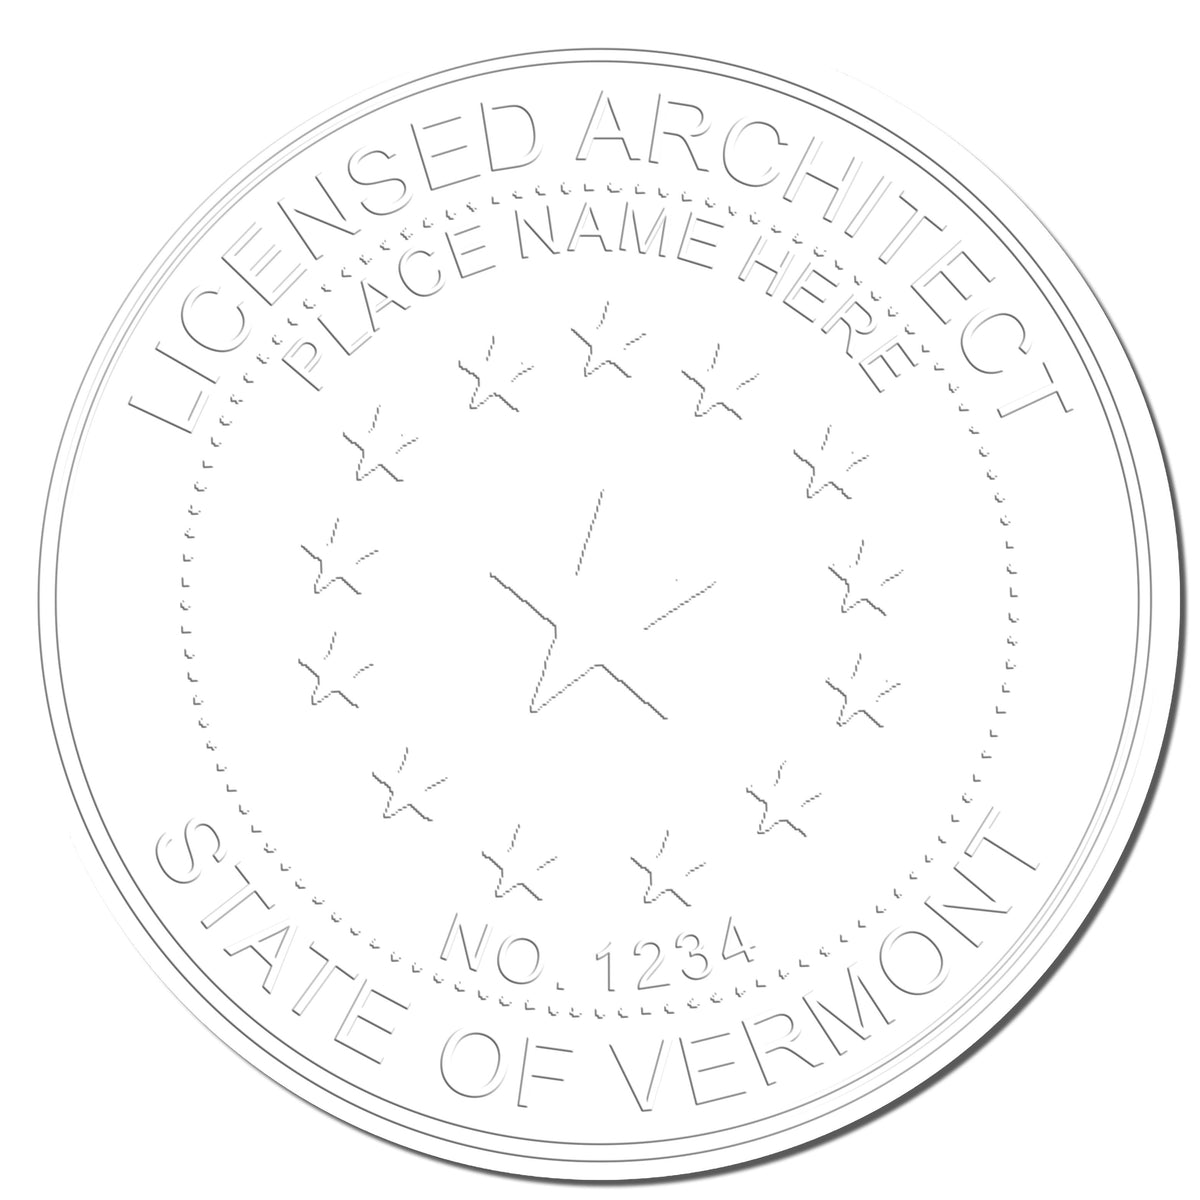 A photograph of the Vermont Desk Architect Embossing Seal stamp impression reveals a vivid, professional image of the on paper.